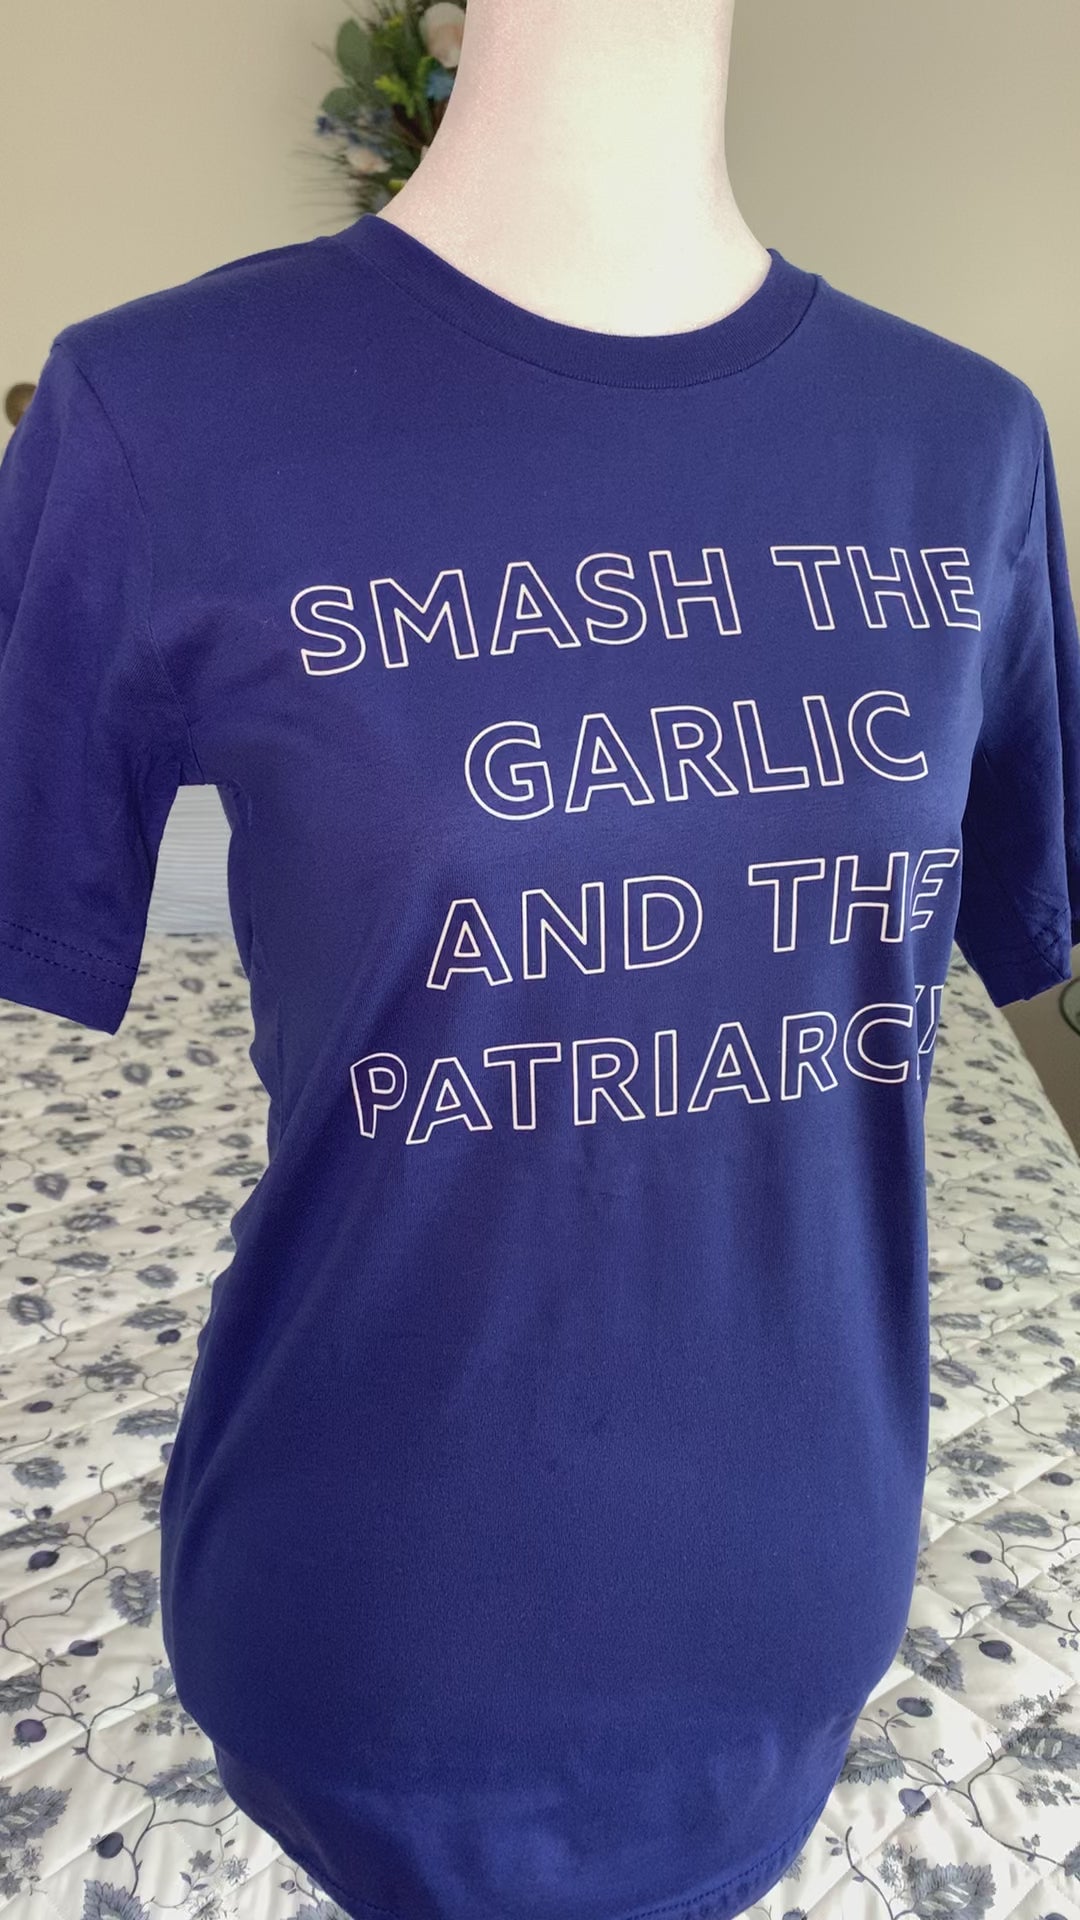 A bright blue tee that reads "Smash the Garlic and the Patriarchy" in white block letters hangs on a manikin